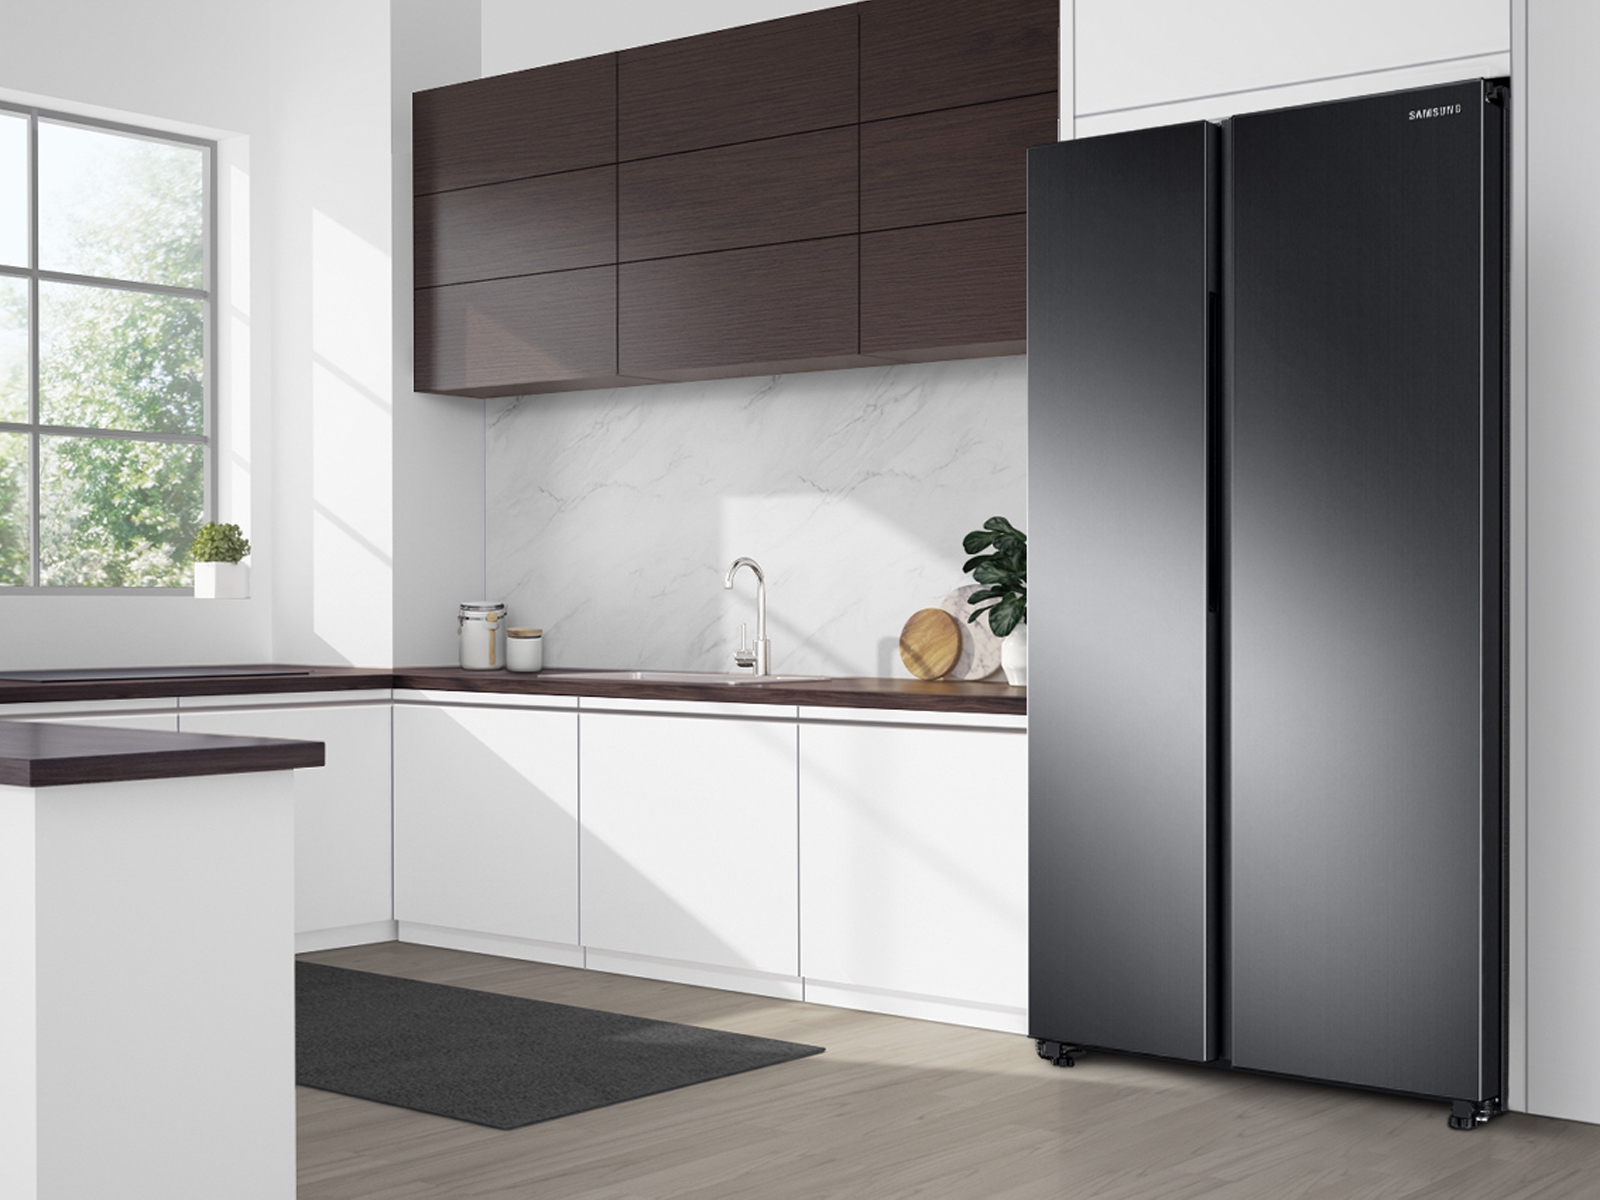 Thumbnail image of 23 cu. ft. Smart Counter Depth Side-by-Side Refrigerator in Black Stainless Steel